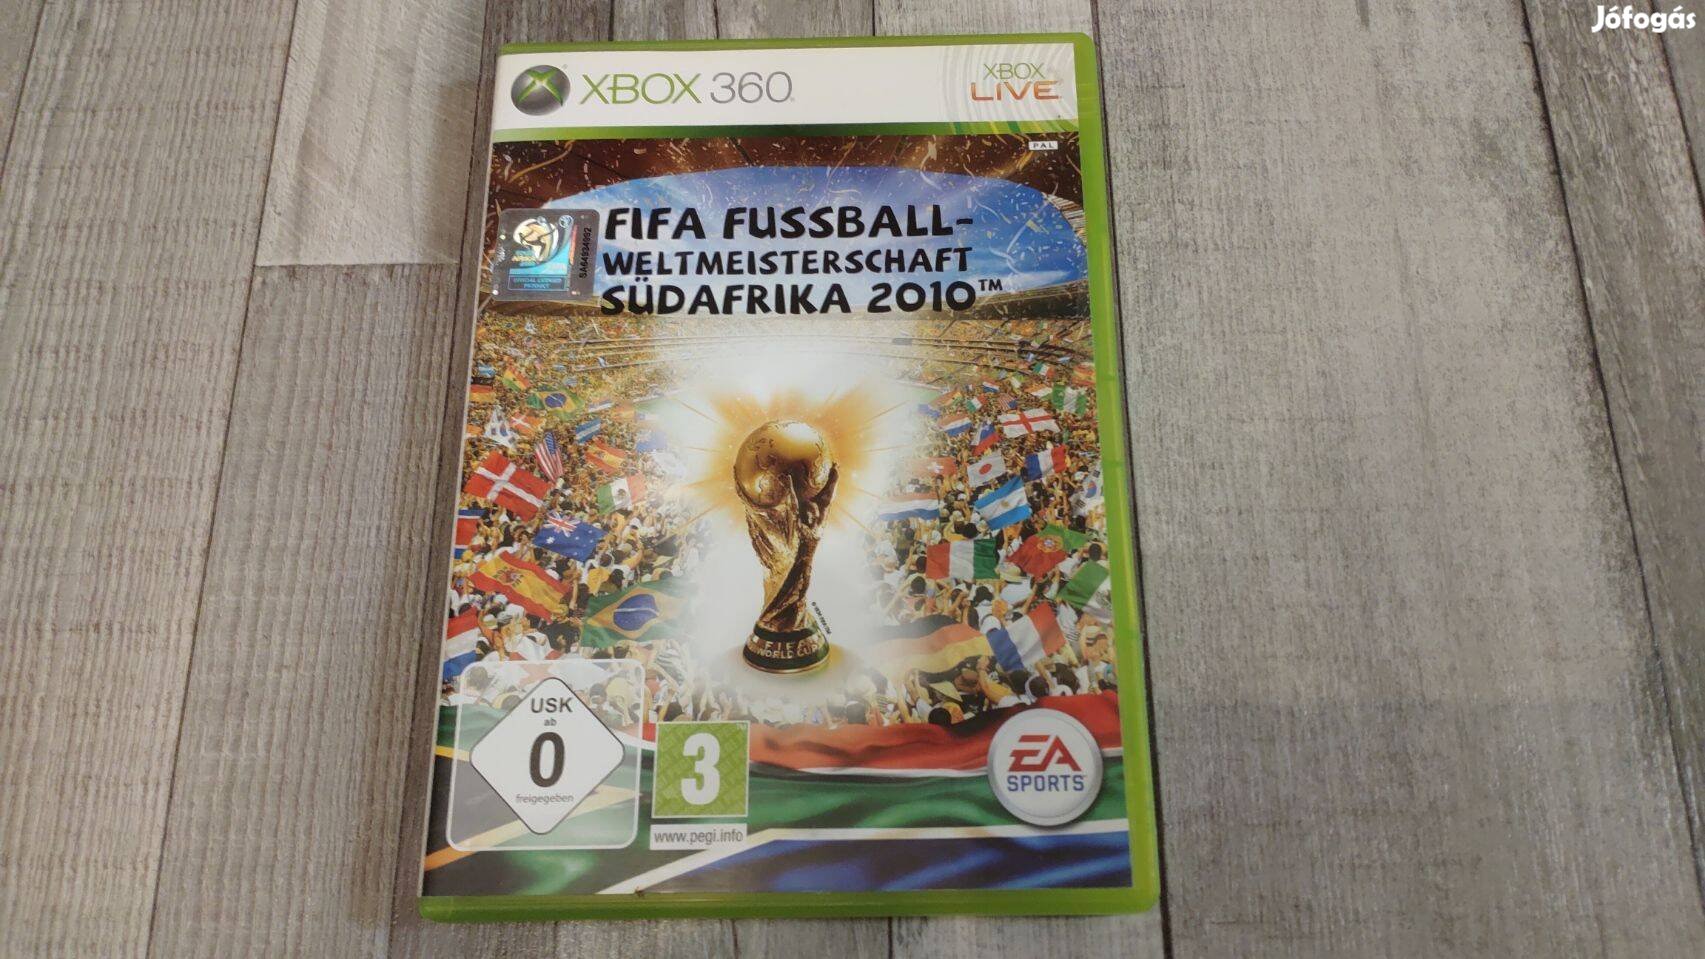 Top Xbox 360 : FIFA World Cup South Africa 2010 - Német